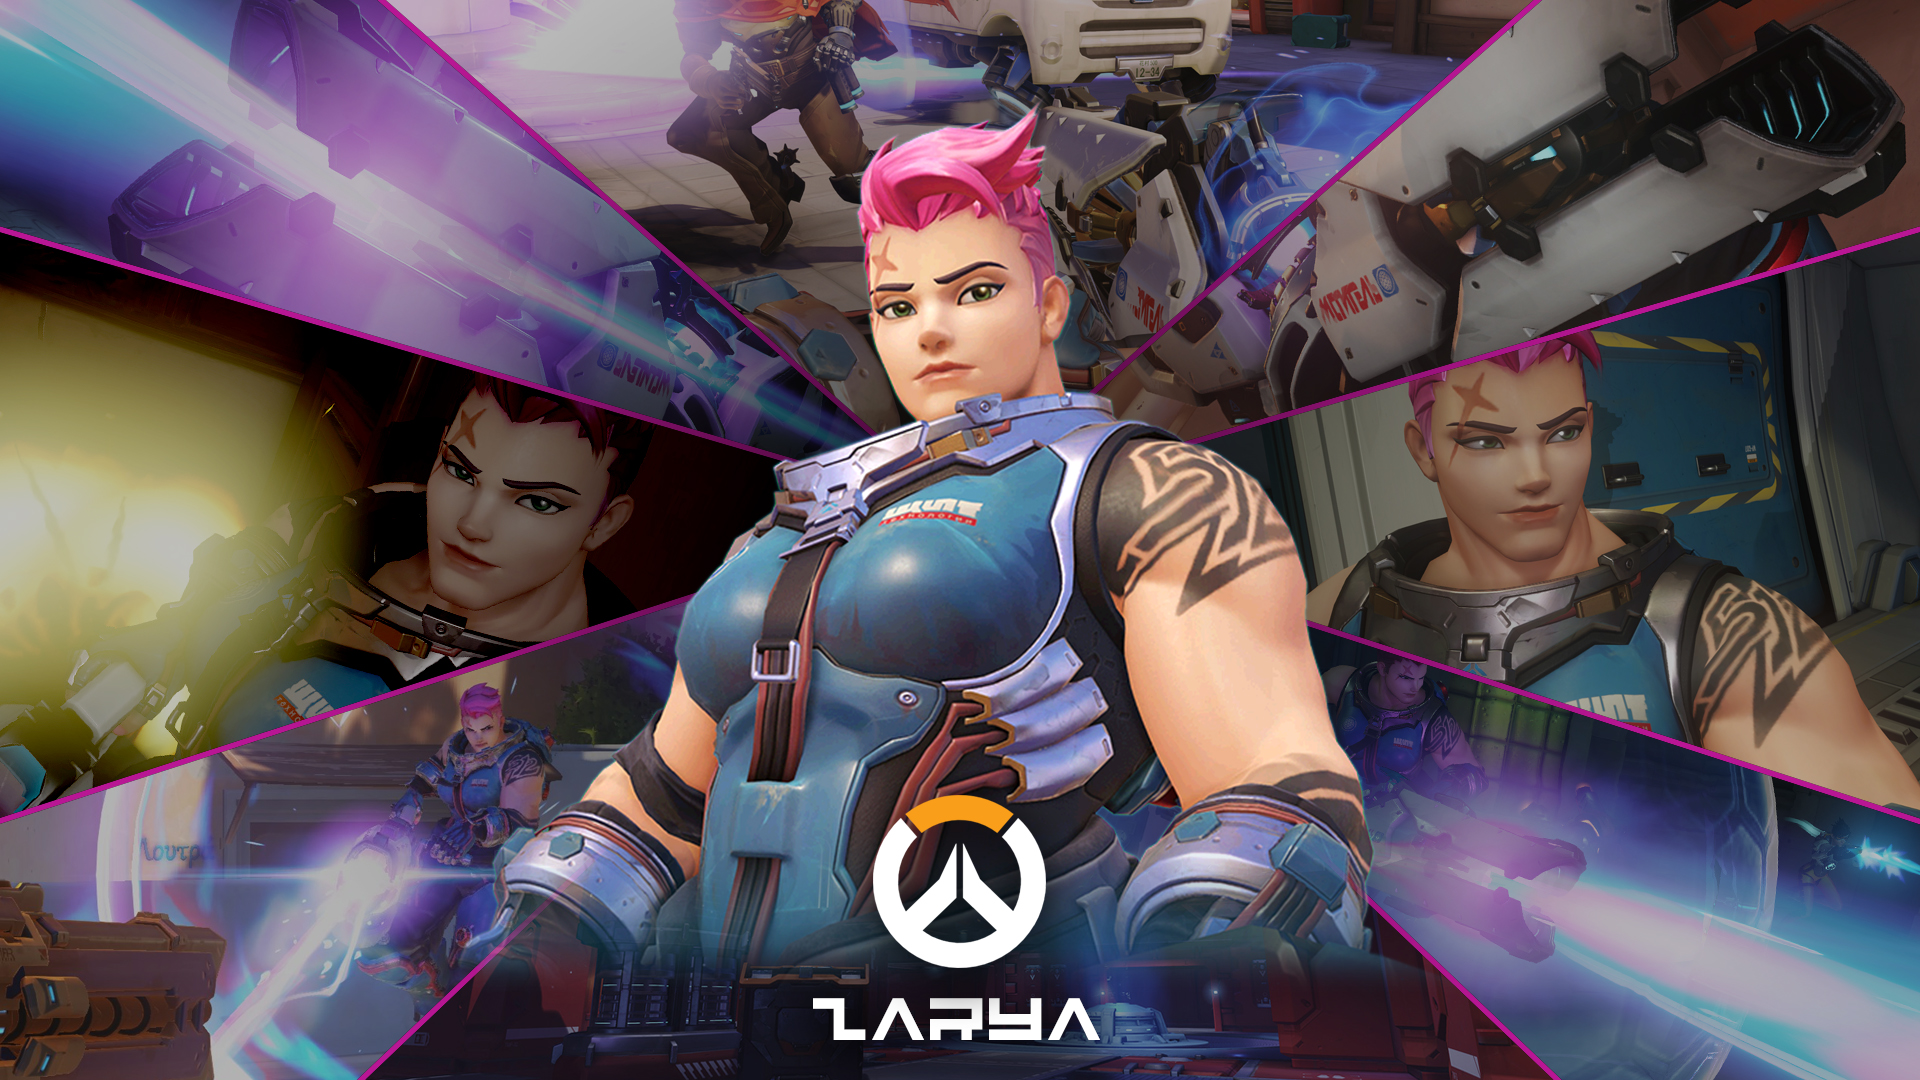 Download Zarya the powerful and dedicated tank from Overwatch Wallpaper   Wallpaperscom